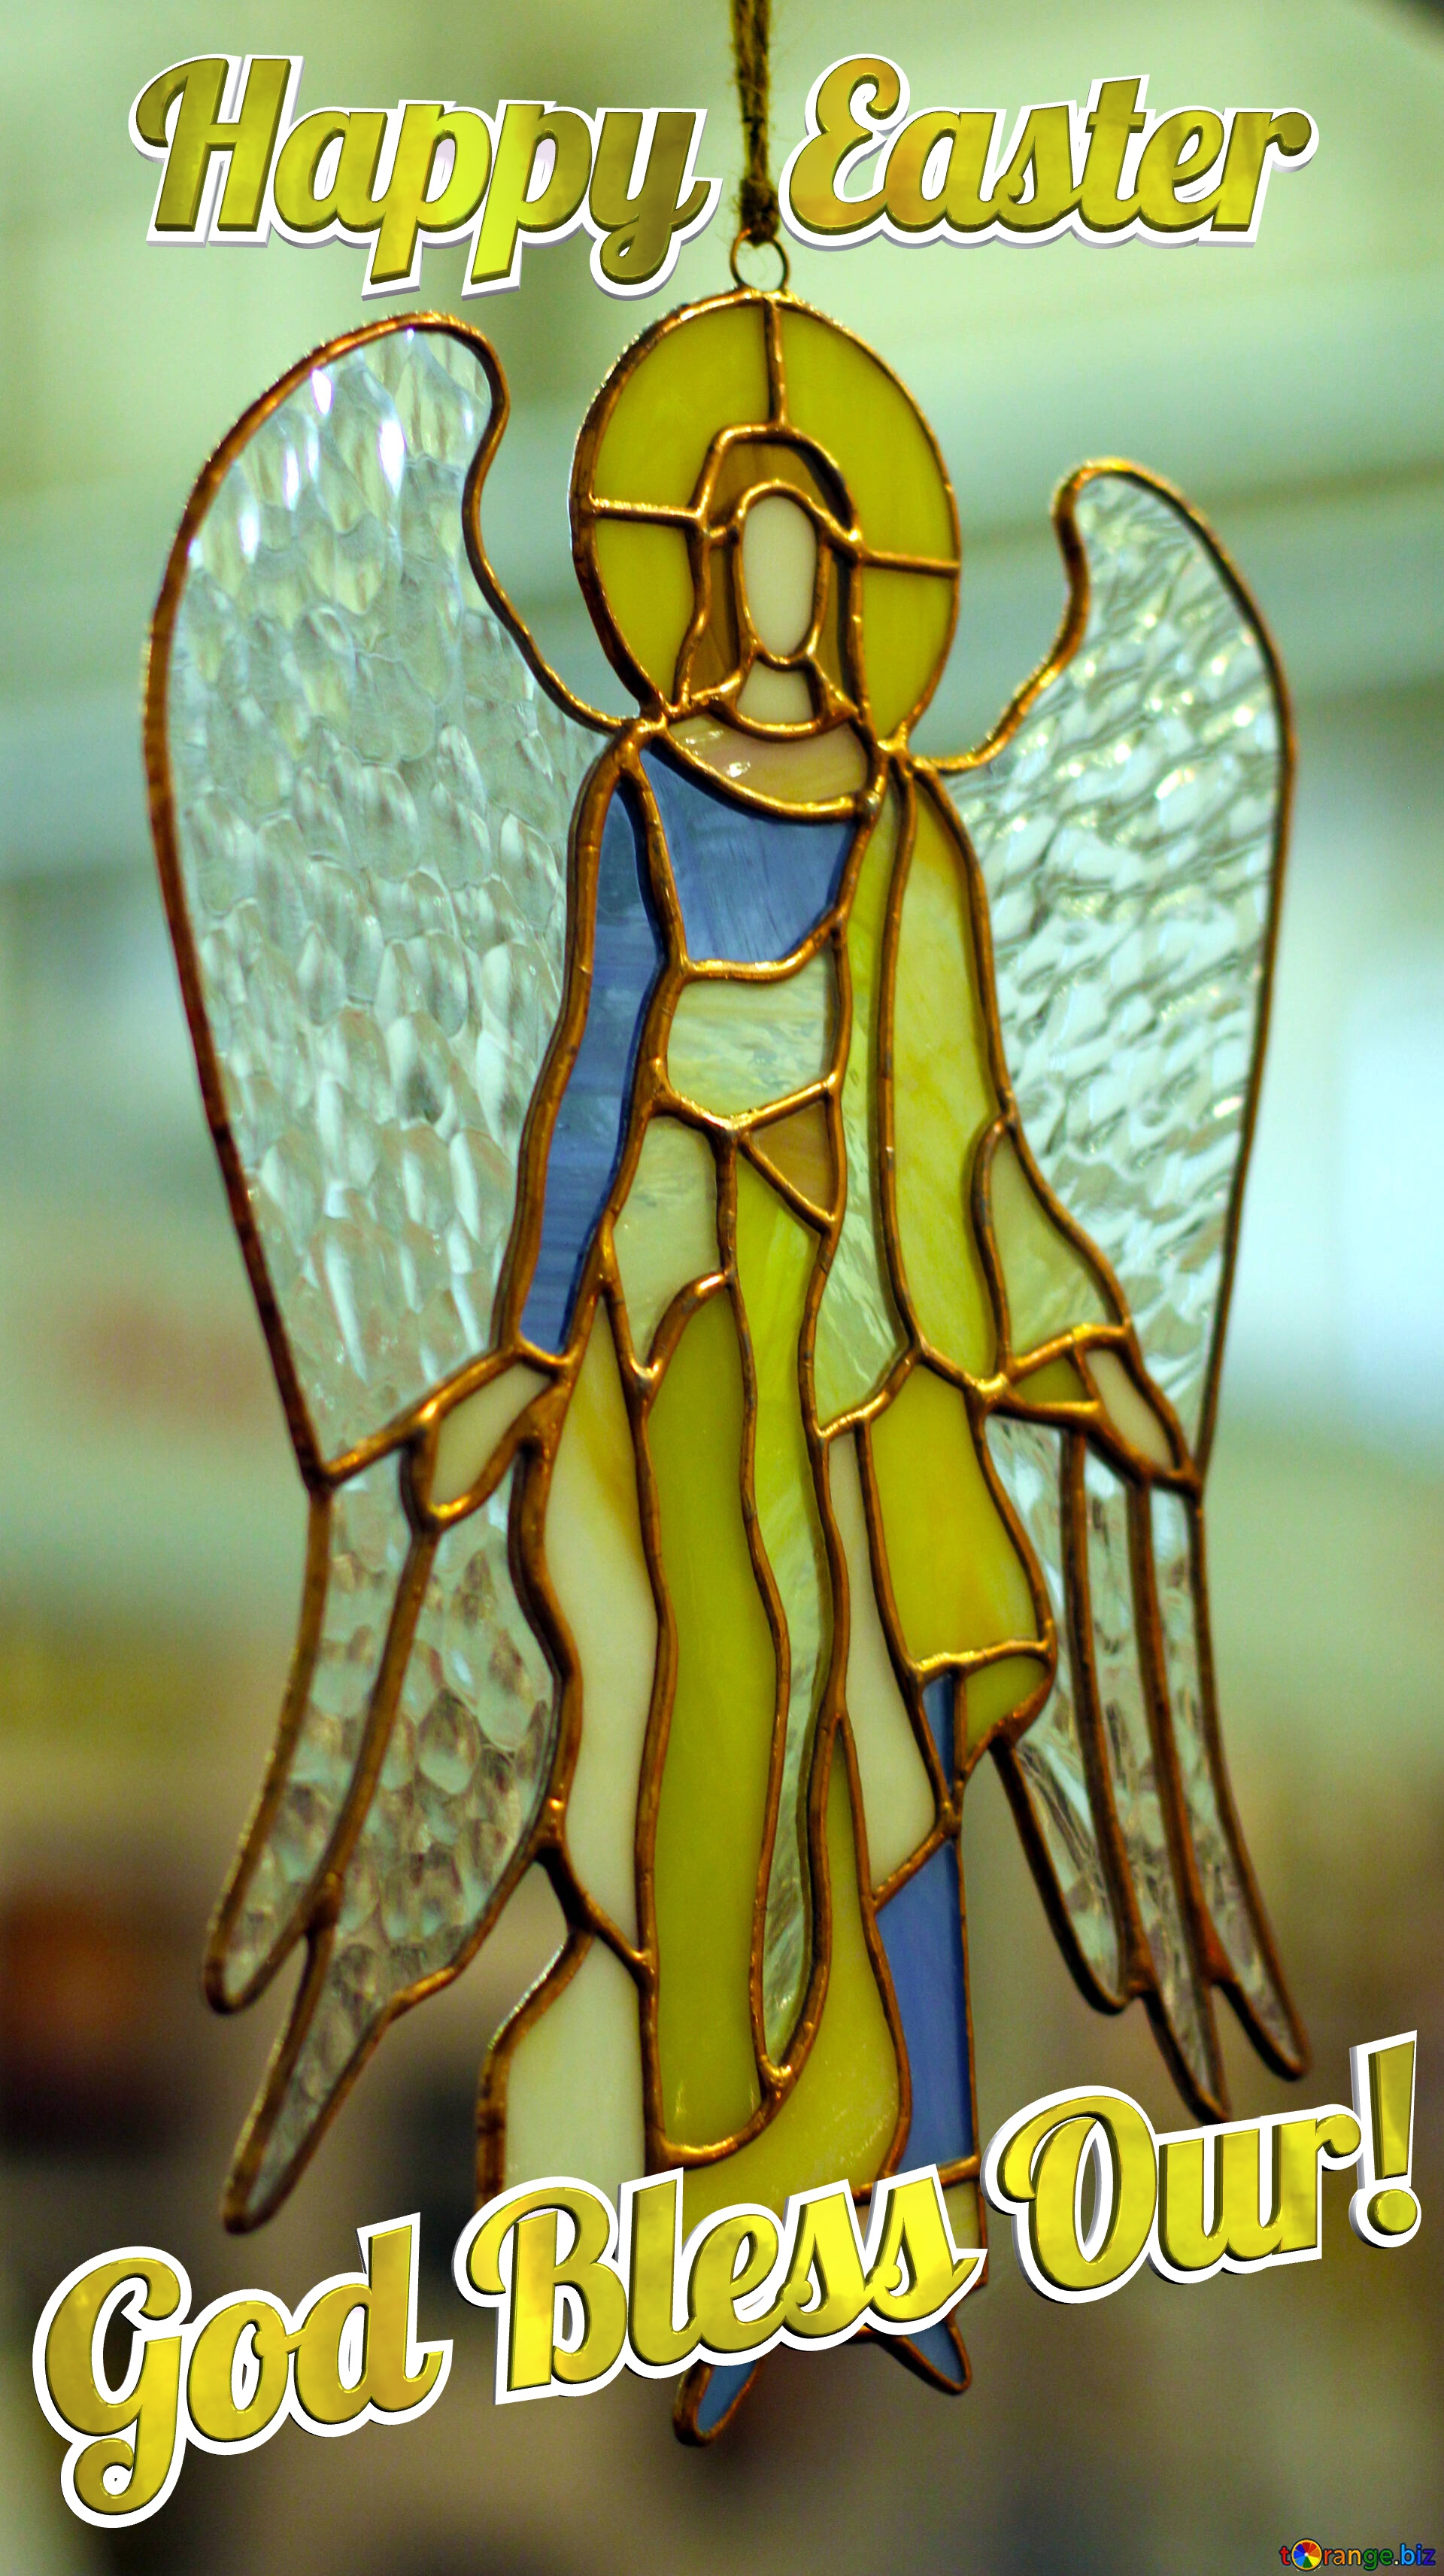 Angel God Bless Our! Happy Easter Stained glass. Angel of colored glass №49161